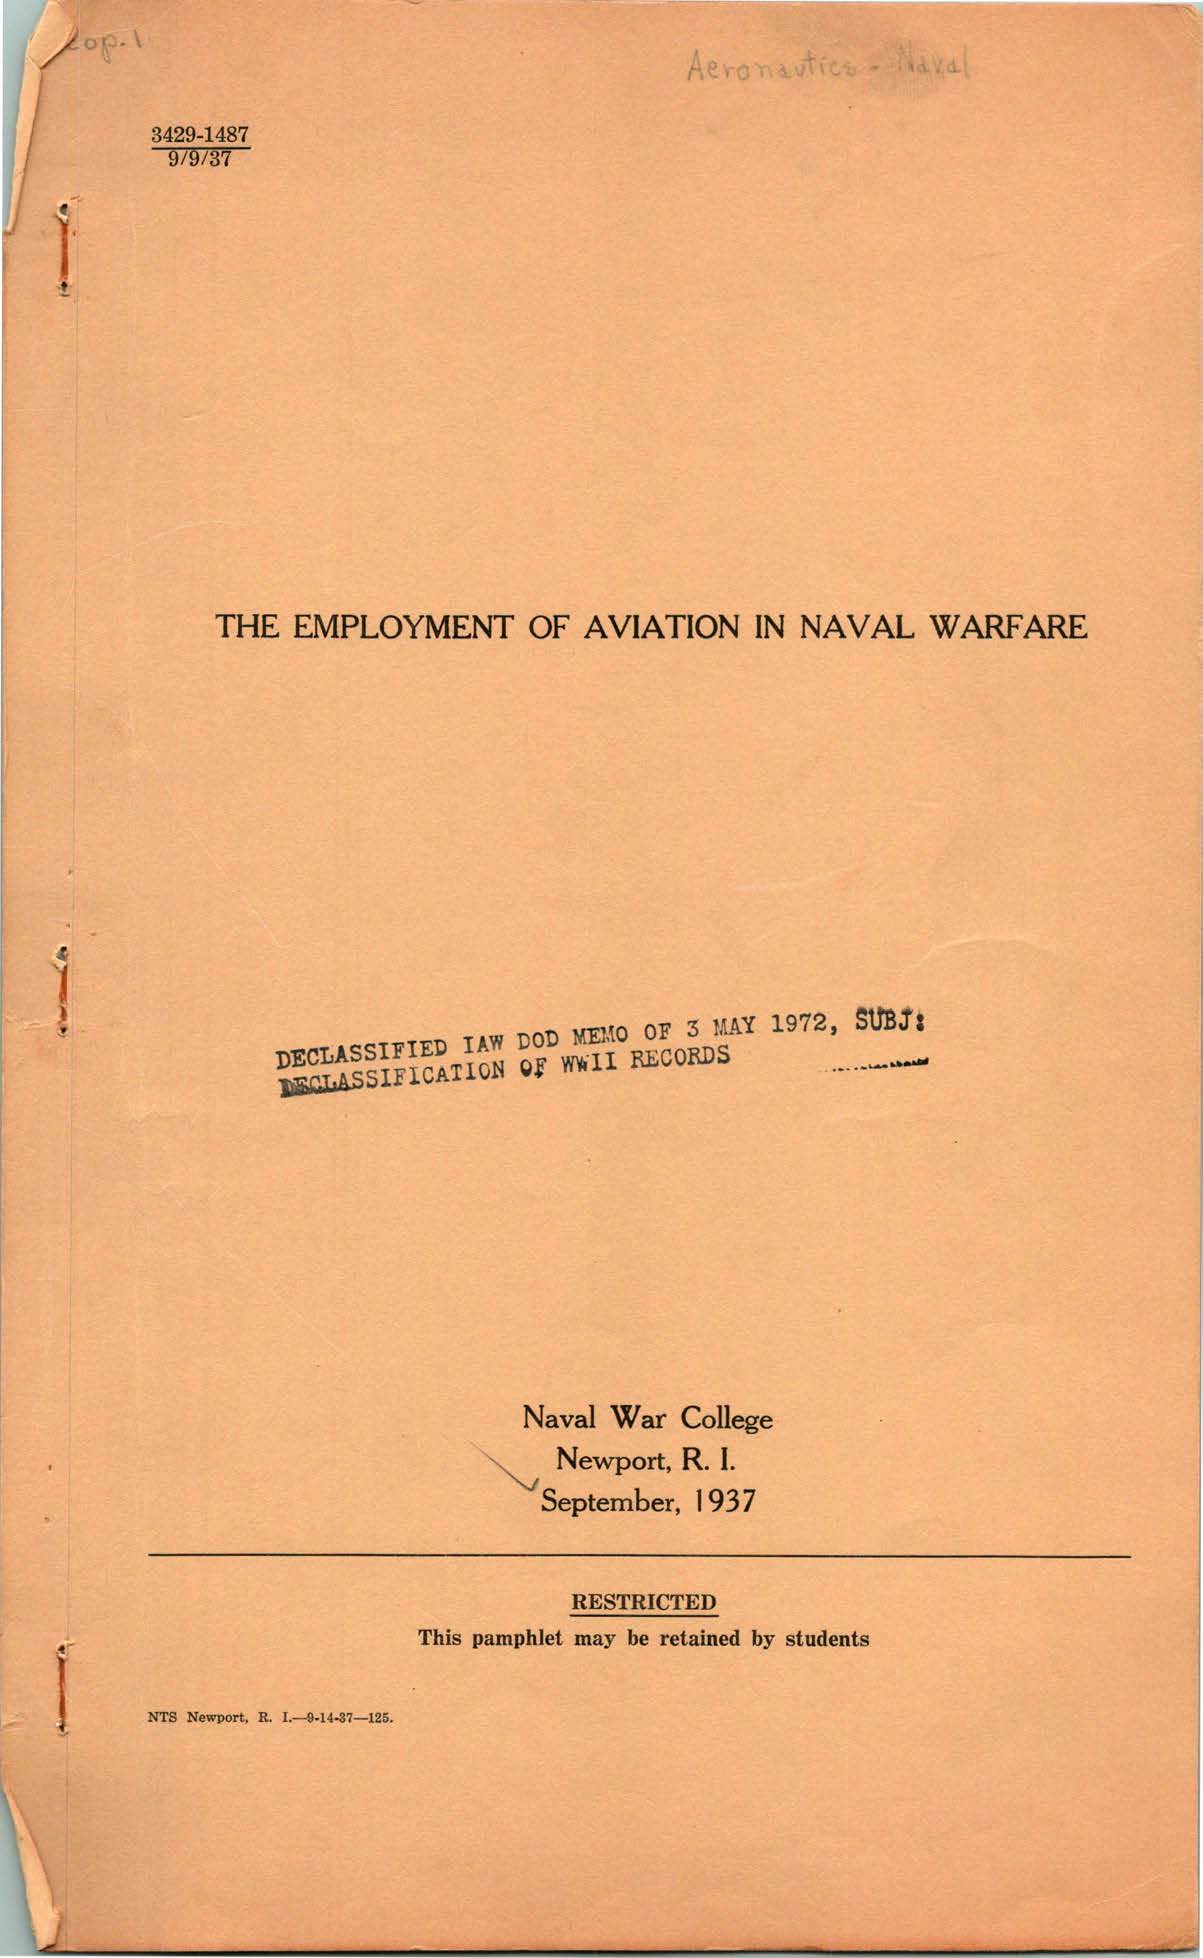 Employment of Aviation in Naval Warfare, by unknown author